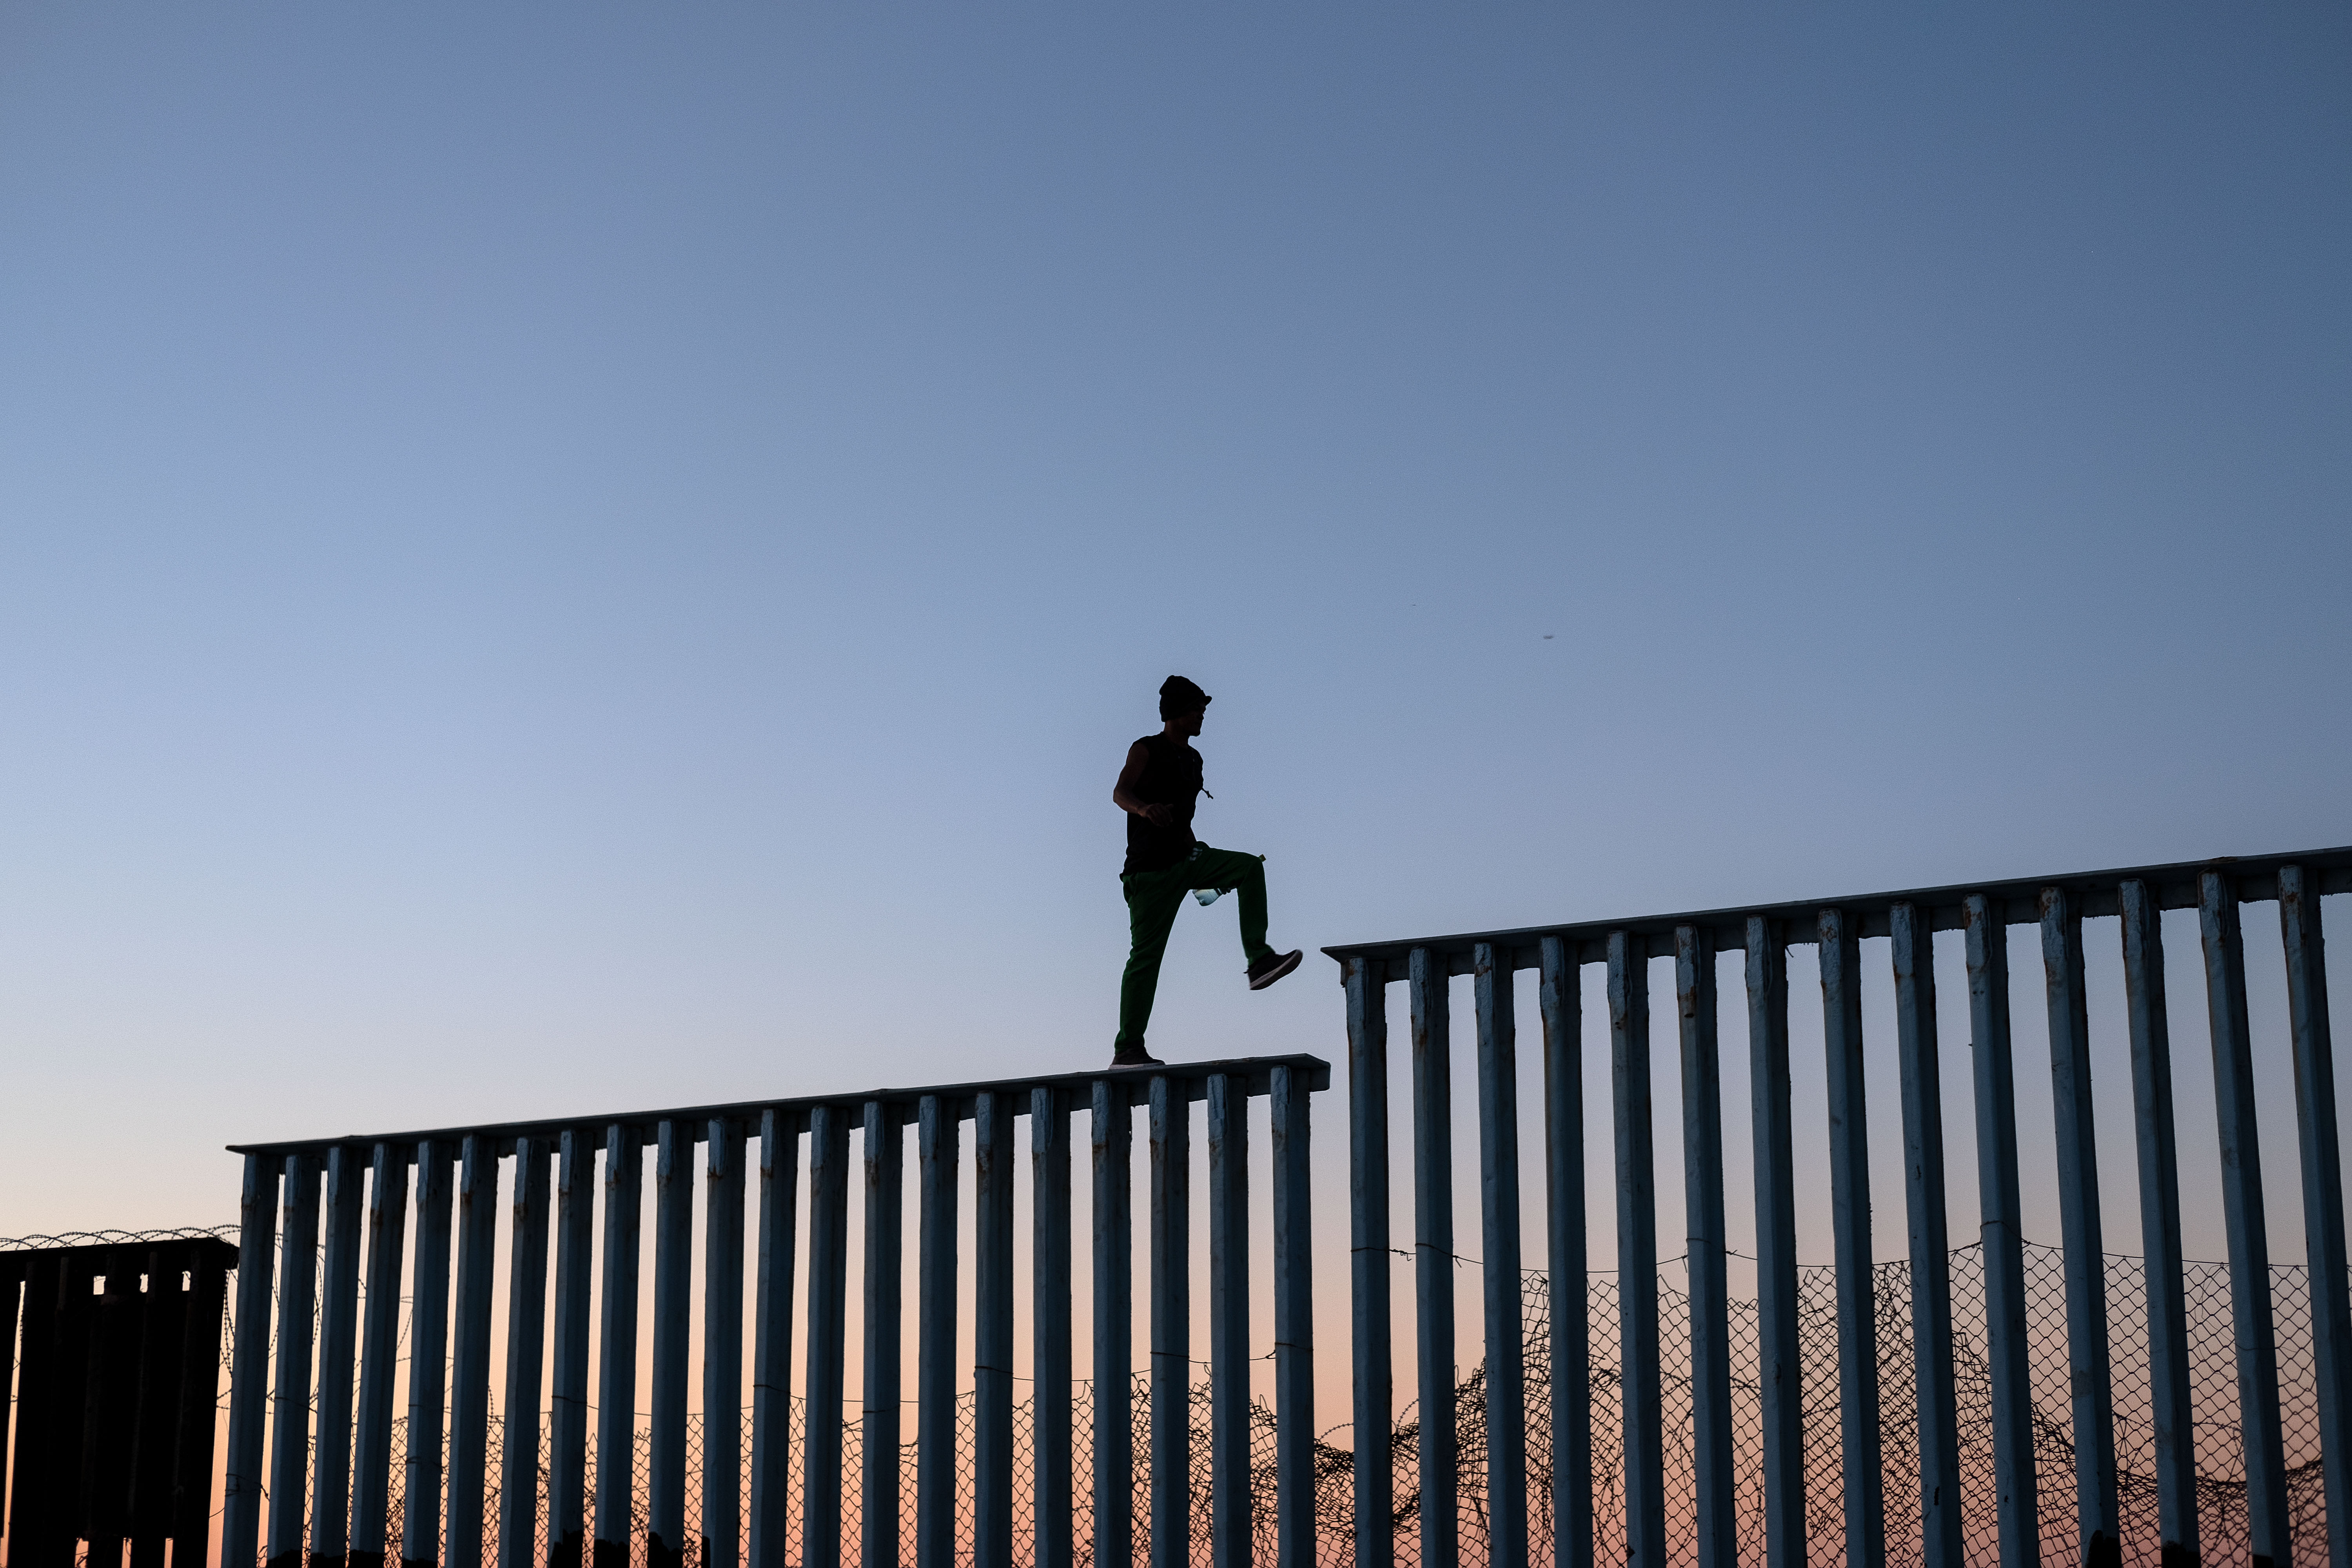 TOPSHOT - A migrant, who claimed not to be part of the Central American migrants moving towards the United States in hopes of a better life, walks on the U.S.-Mexico border fence in Playas de Tijuana, Mexico, on November 14, 2018. - US Defence Secretary Jim Mattis said Tuesday he will visit the US-Mexico border, where thousands of active-duty soldiers have been deployed to help border police prepare for the arrival of a "caravan" of migrants. (Photo by Guillermo Arias / AFP)